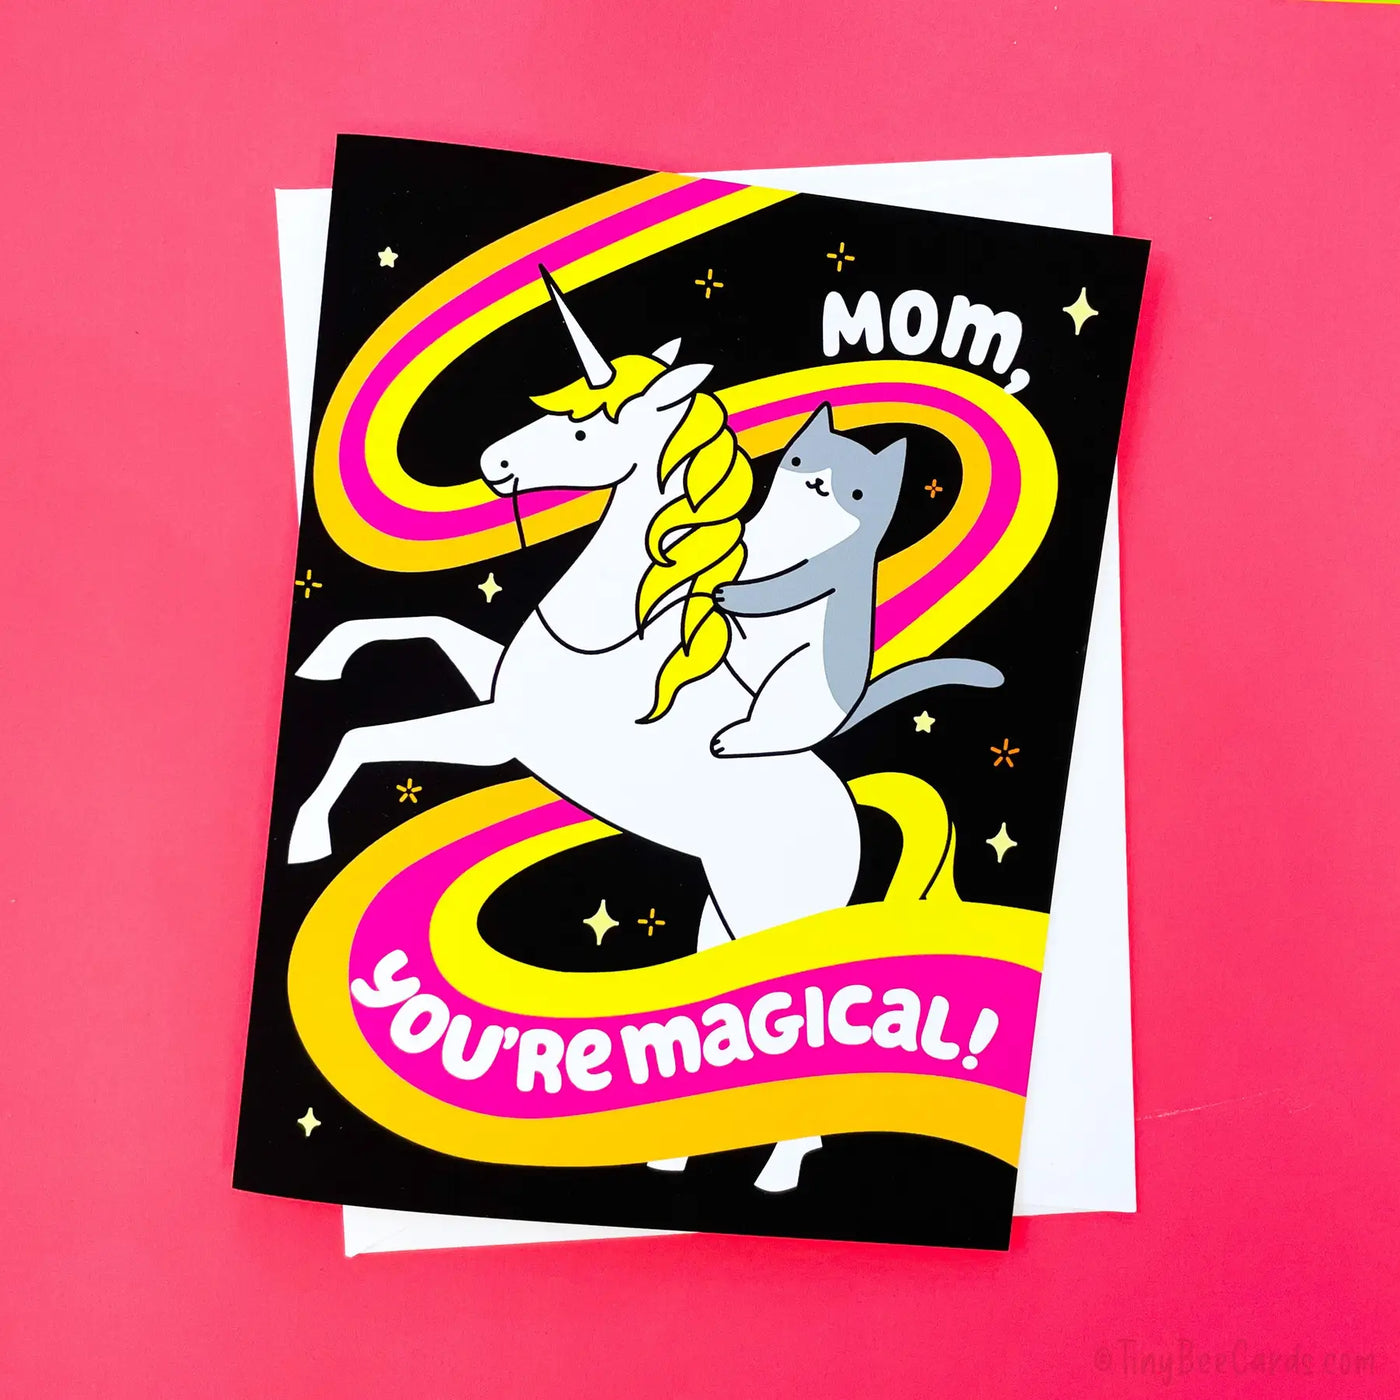 "Mom, You're Magical!" Cat Riding Unicorn | Mother's Day Card